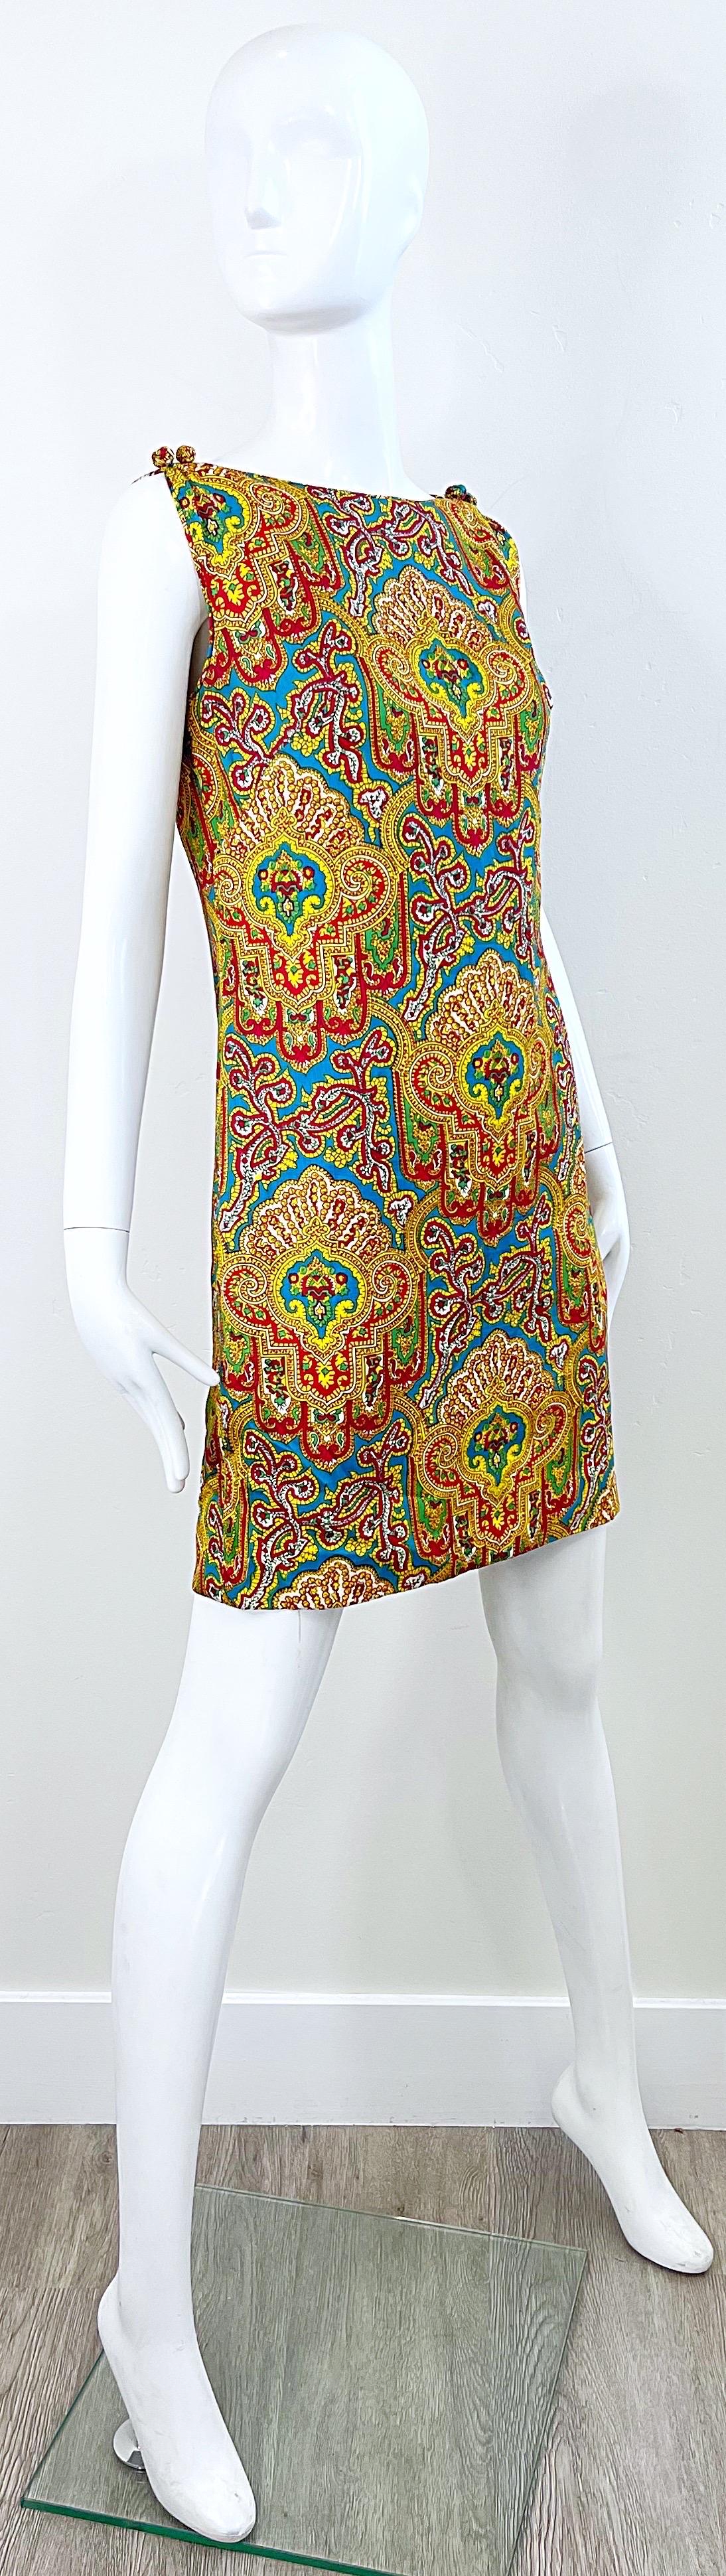 1960s Dynasty Paisley Bright Colorful Silk Vintage 60s Sleeveless Shift Dress For Sale 6